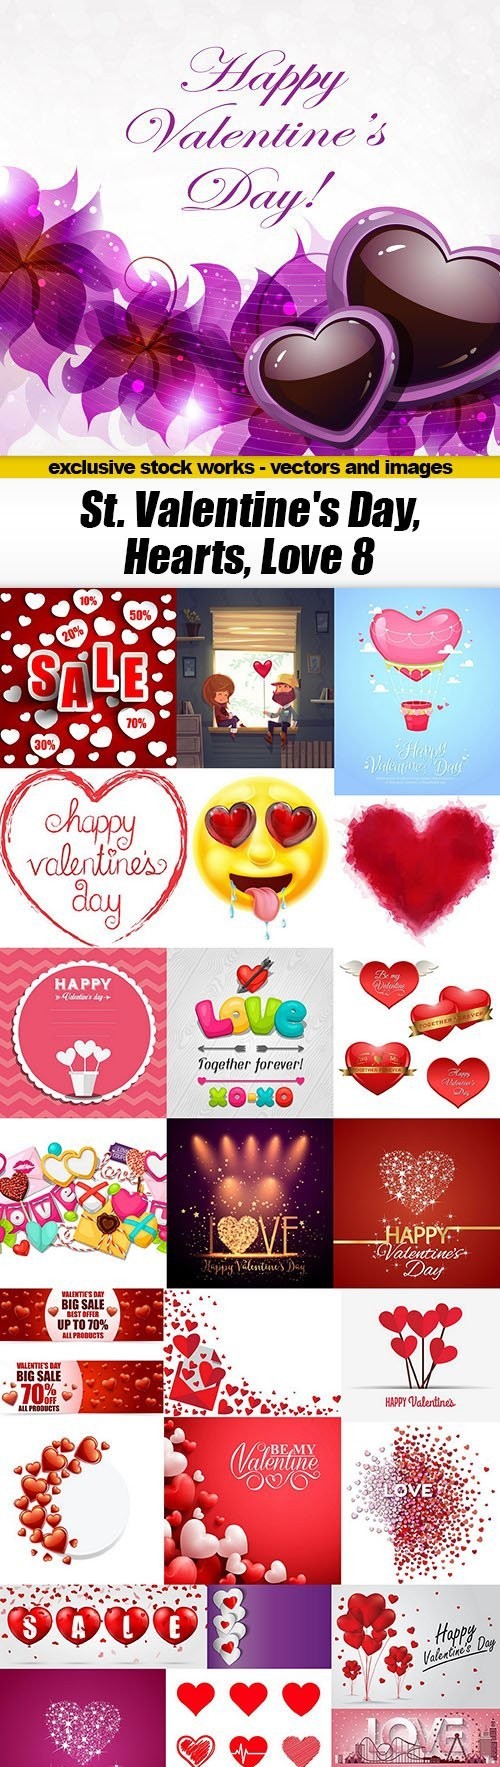 St. Valentine's Day, Hearts, Love #8, 25xEPS